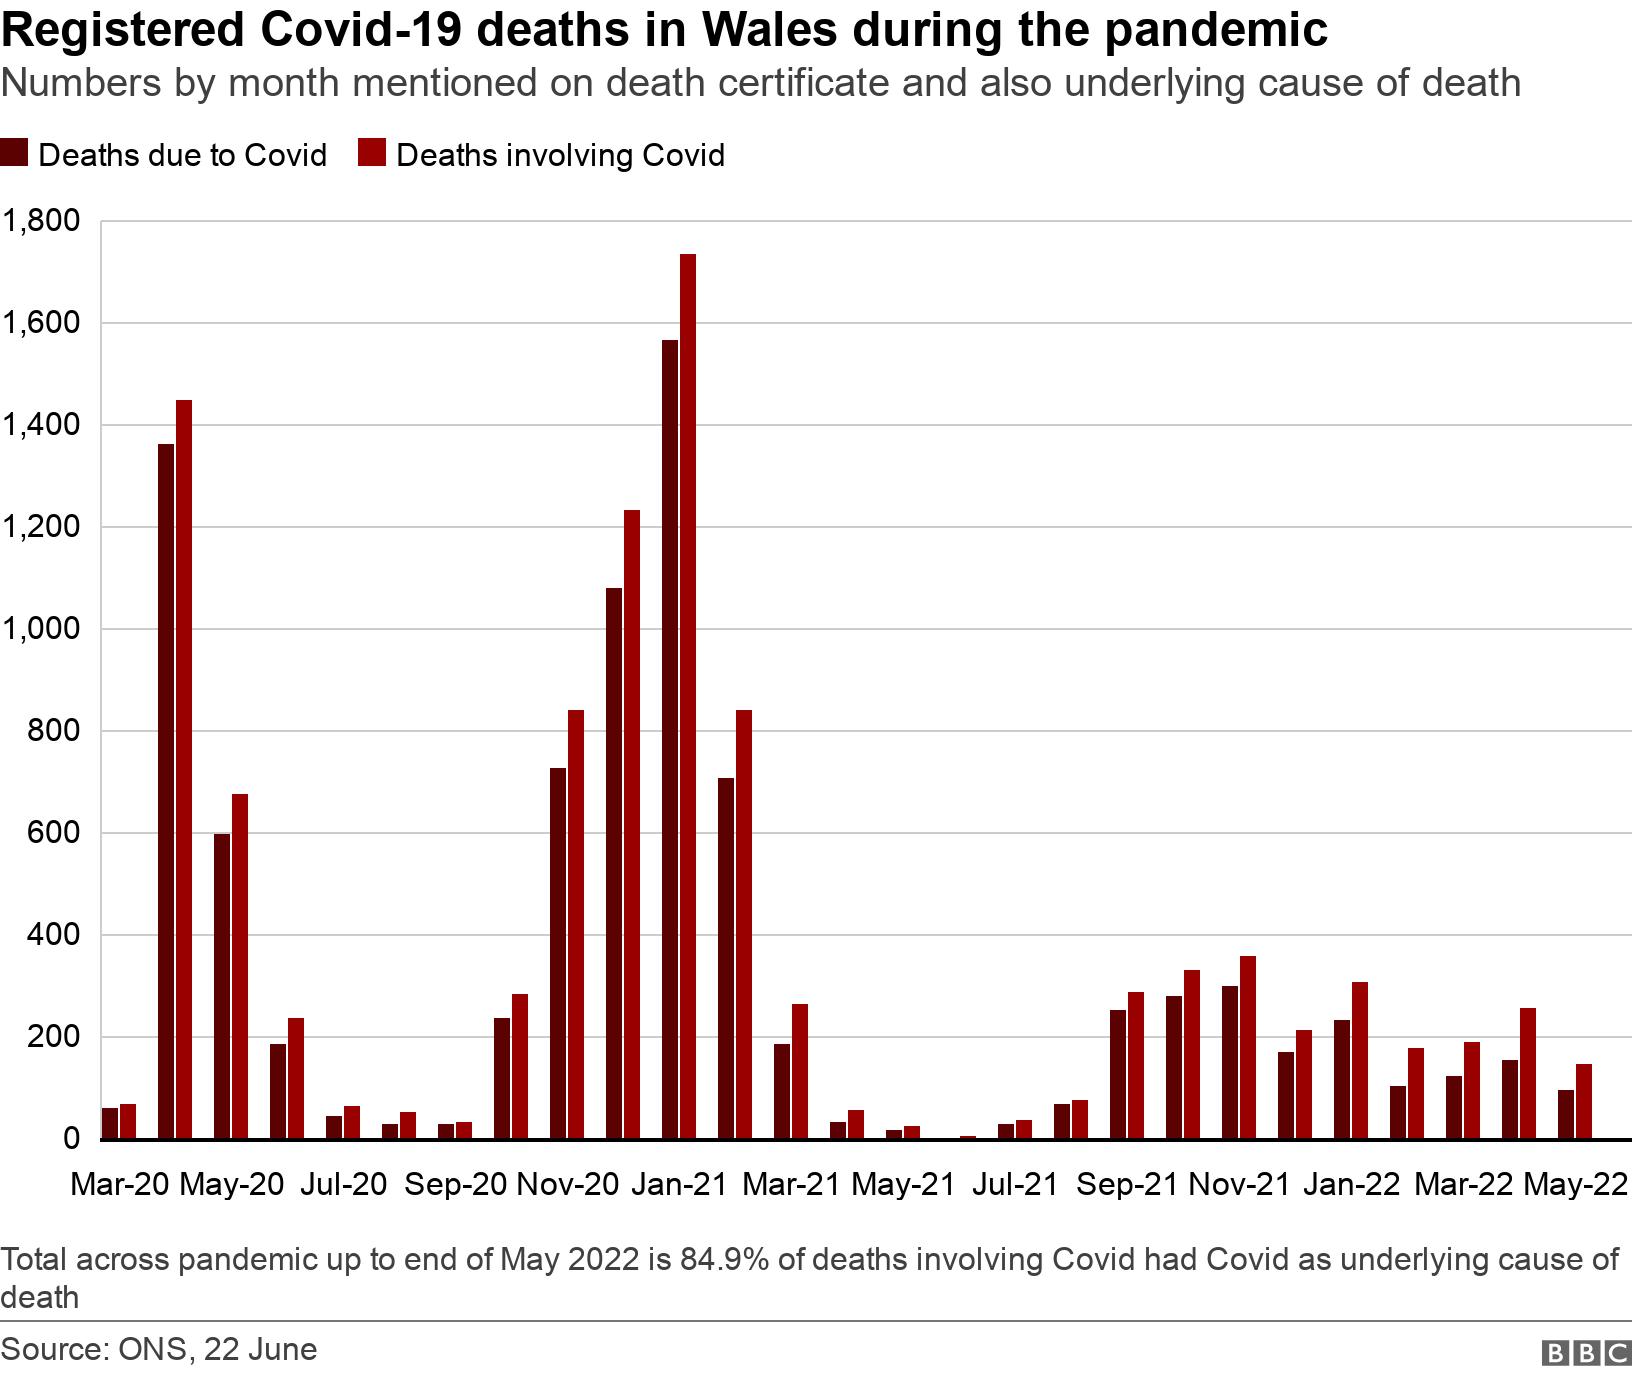 Registered Covid-19 deaths in Wales during the pandemic. Numbers by month mentioned on death certificate and also underlying cause of death.  Total across pandemic up to end of May 2022 is 84.9% of deaths involving Covid had Covid as underlying cause of death.